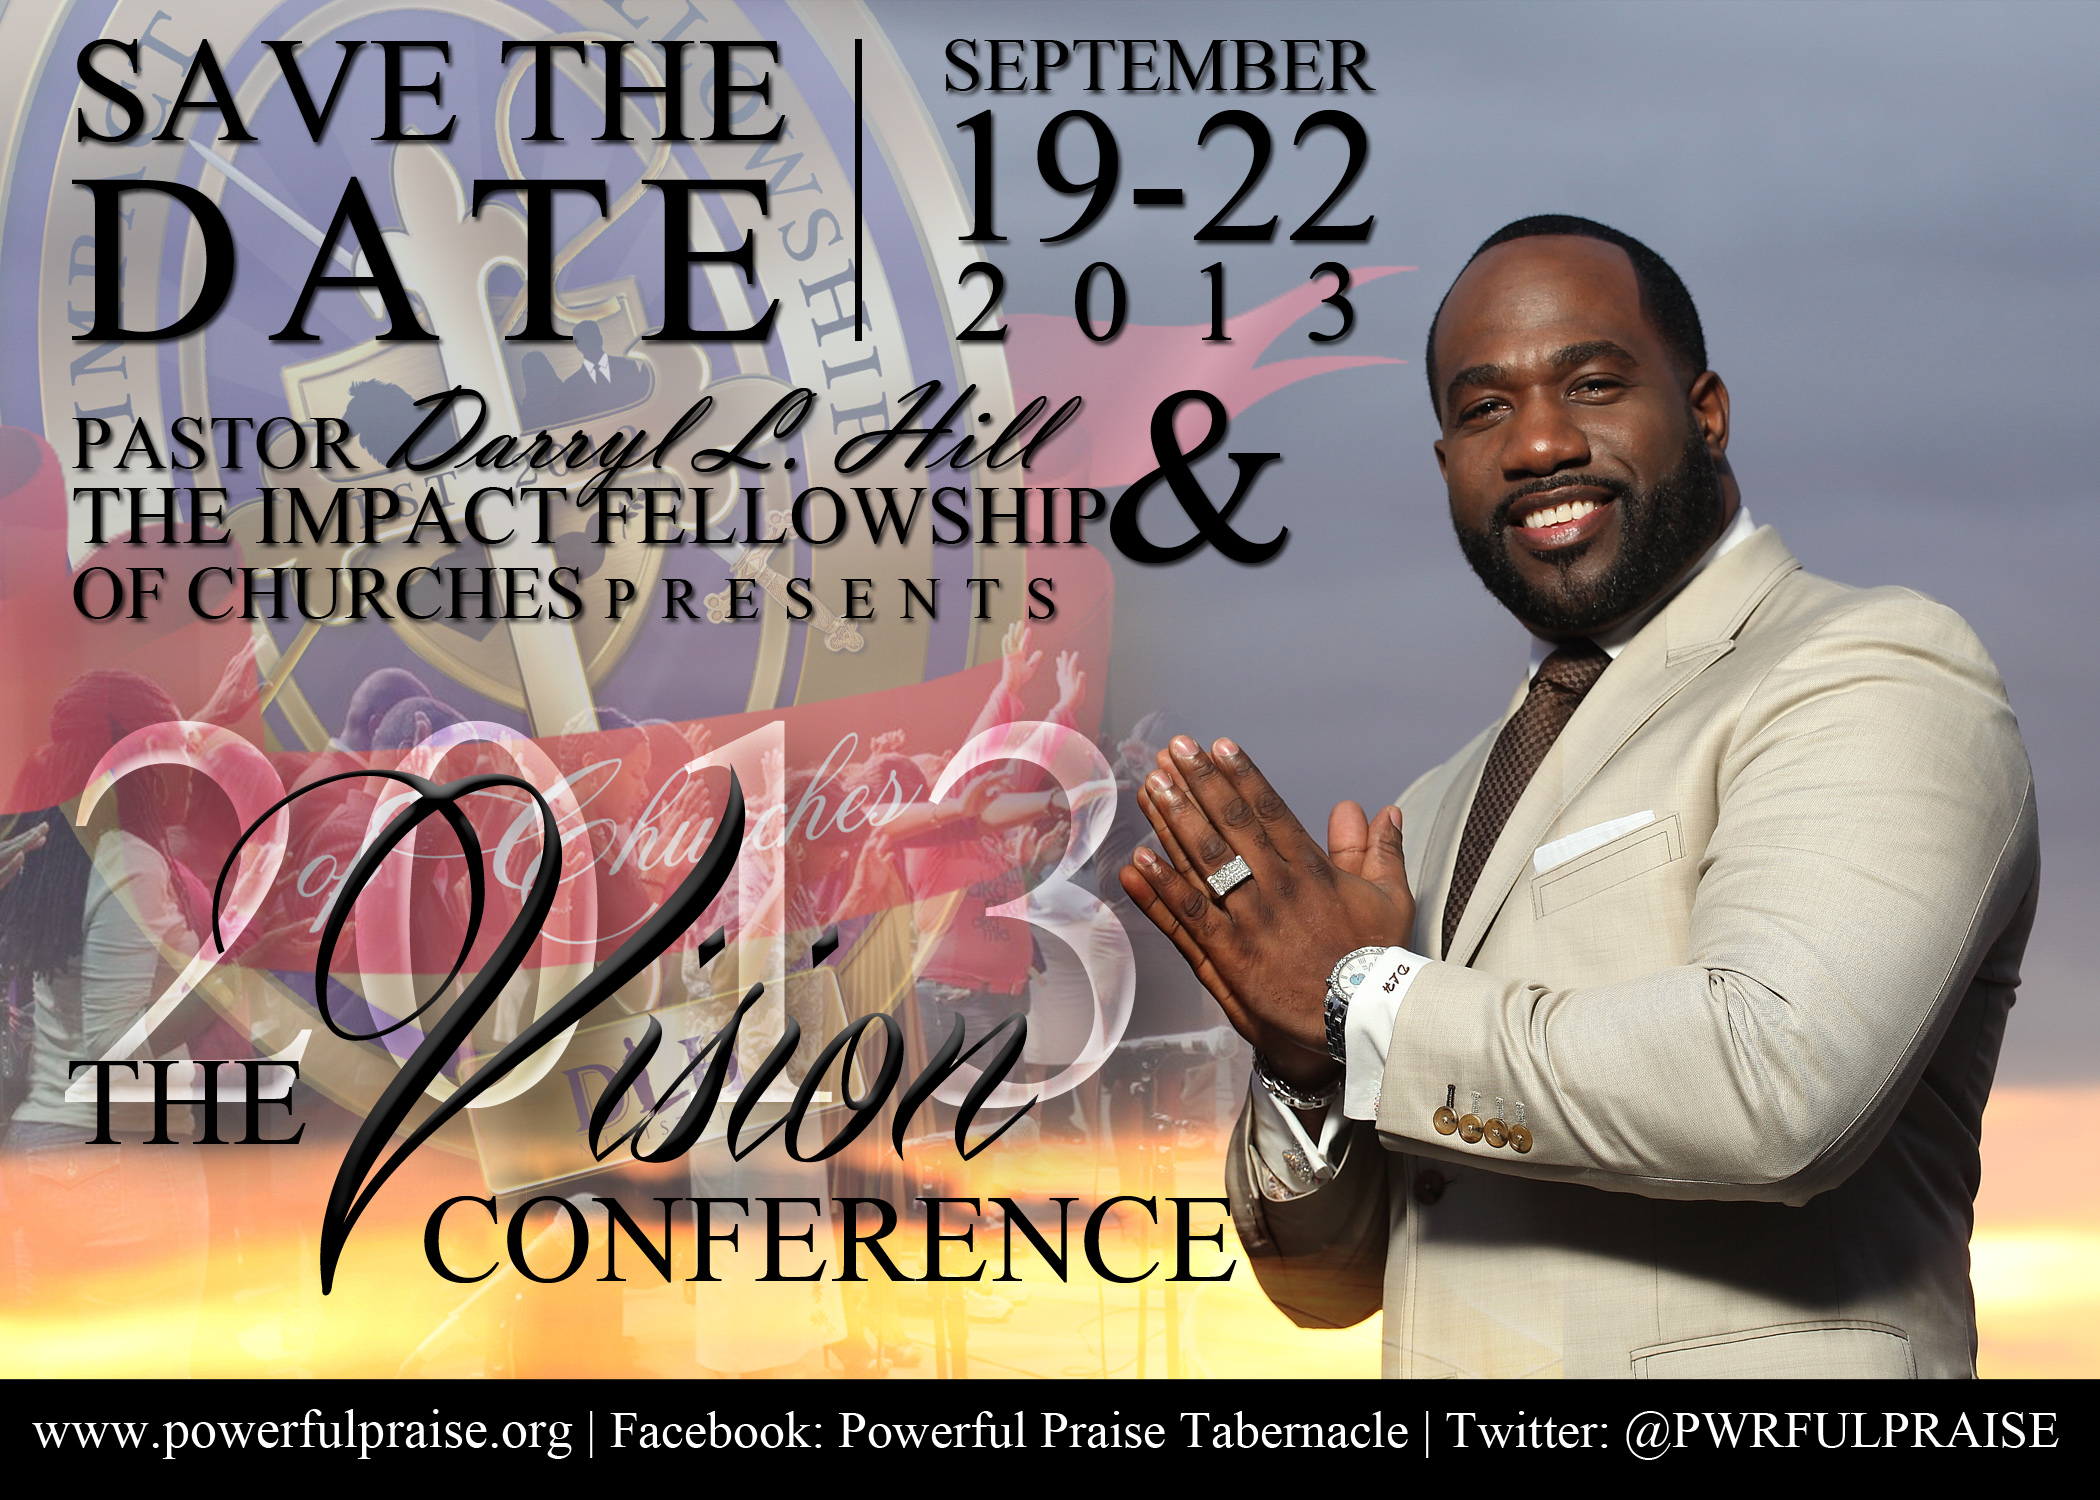 Vision Conference 2013 @ Powerful Praise Tabernacle | Brooklyn | New York | United States